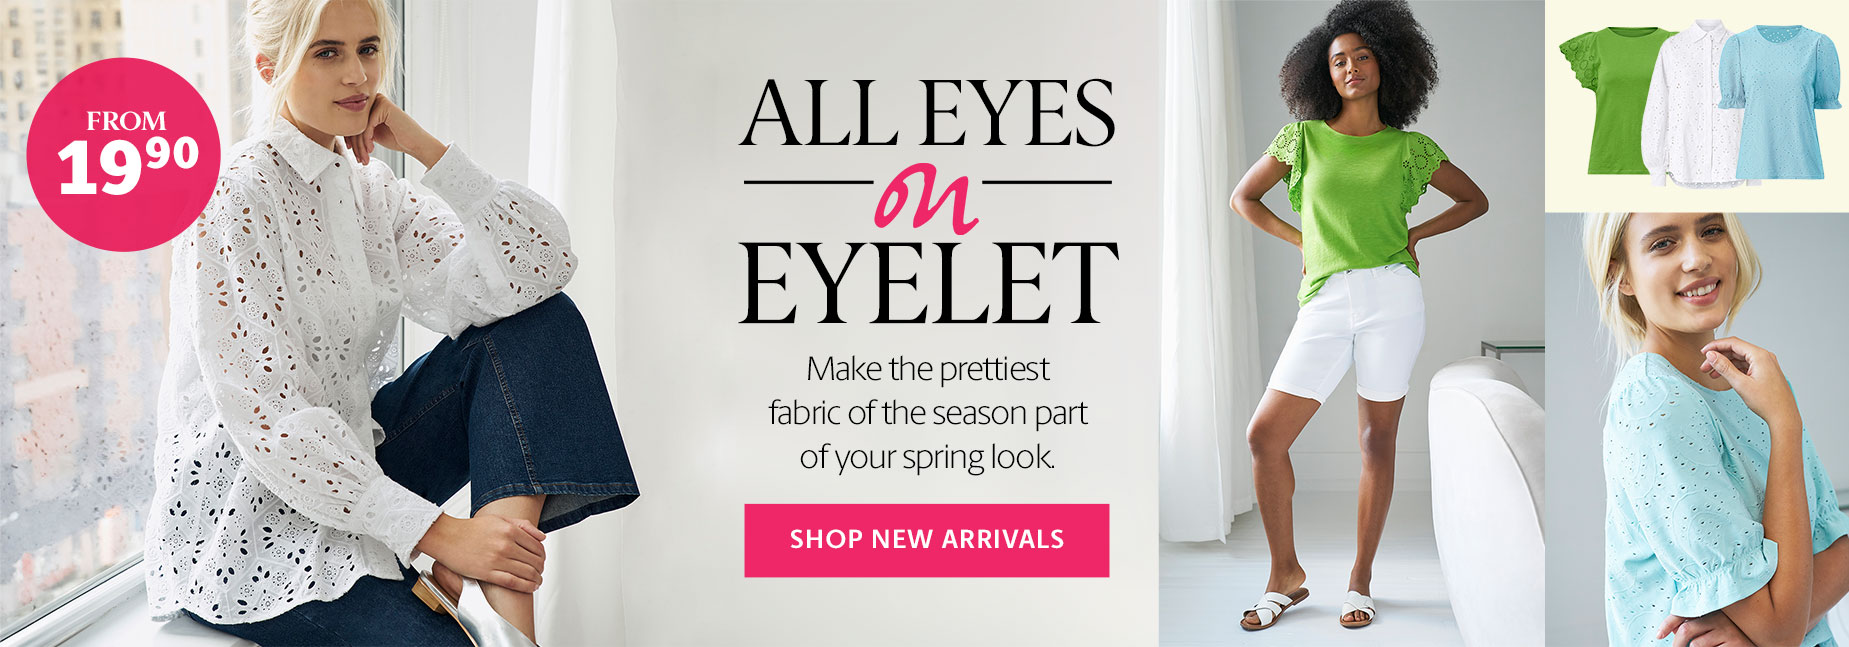 All eyes on eyelet - new arrivals from $19.90